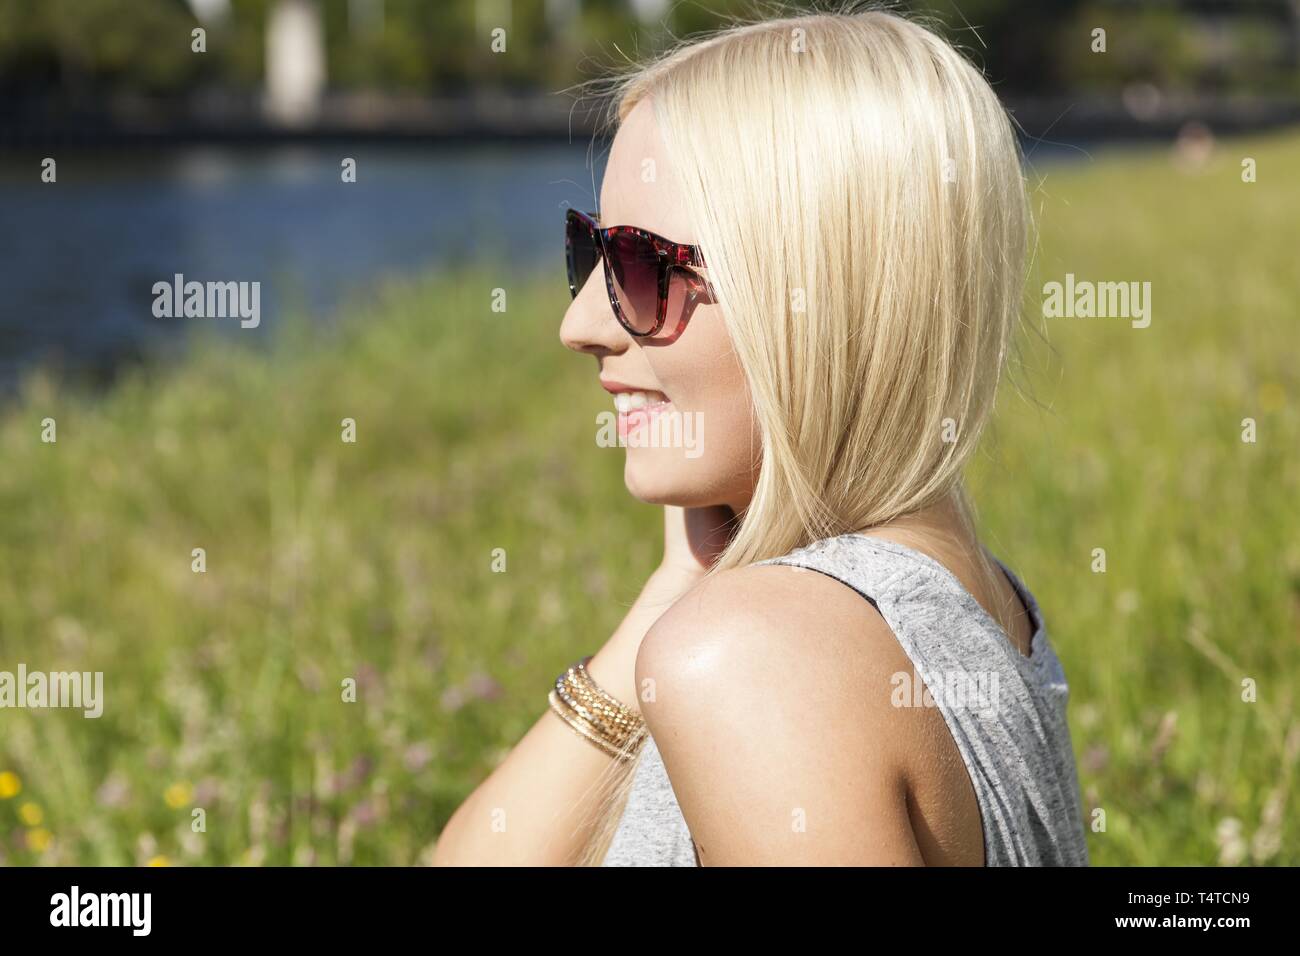 Teen with sun glasses Stock Photo